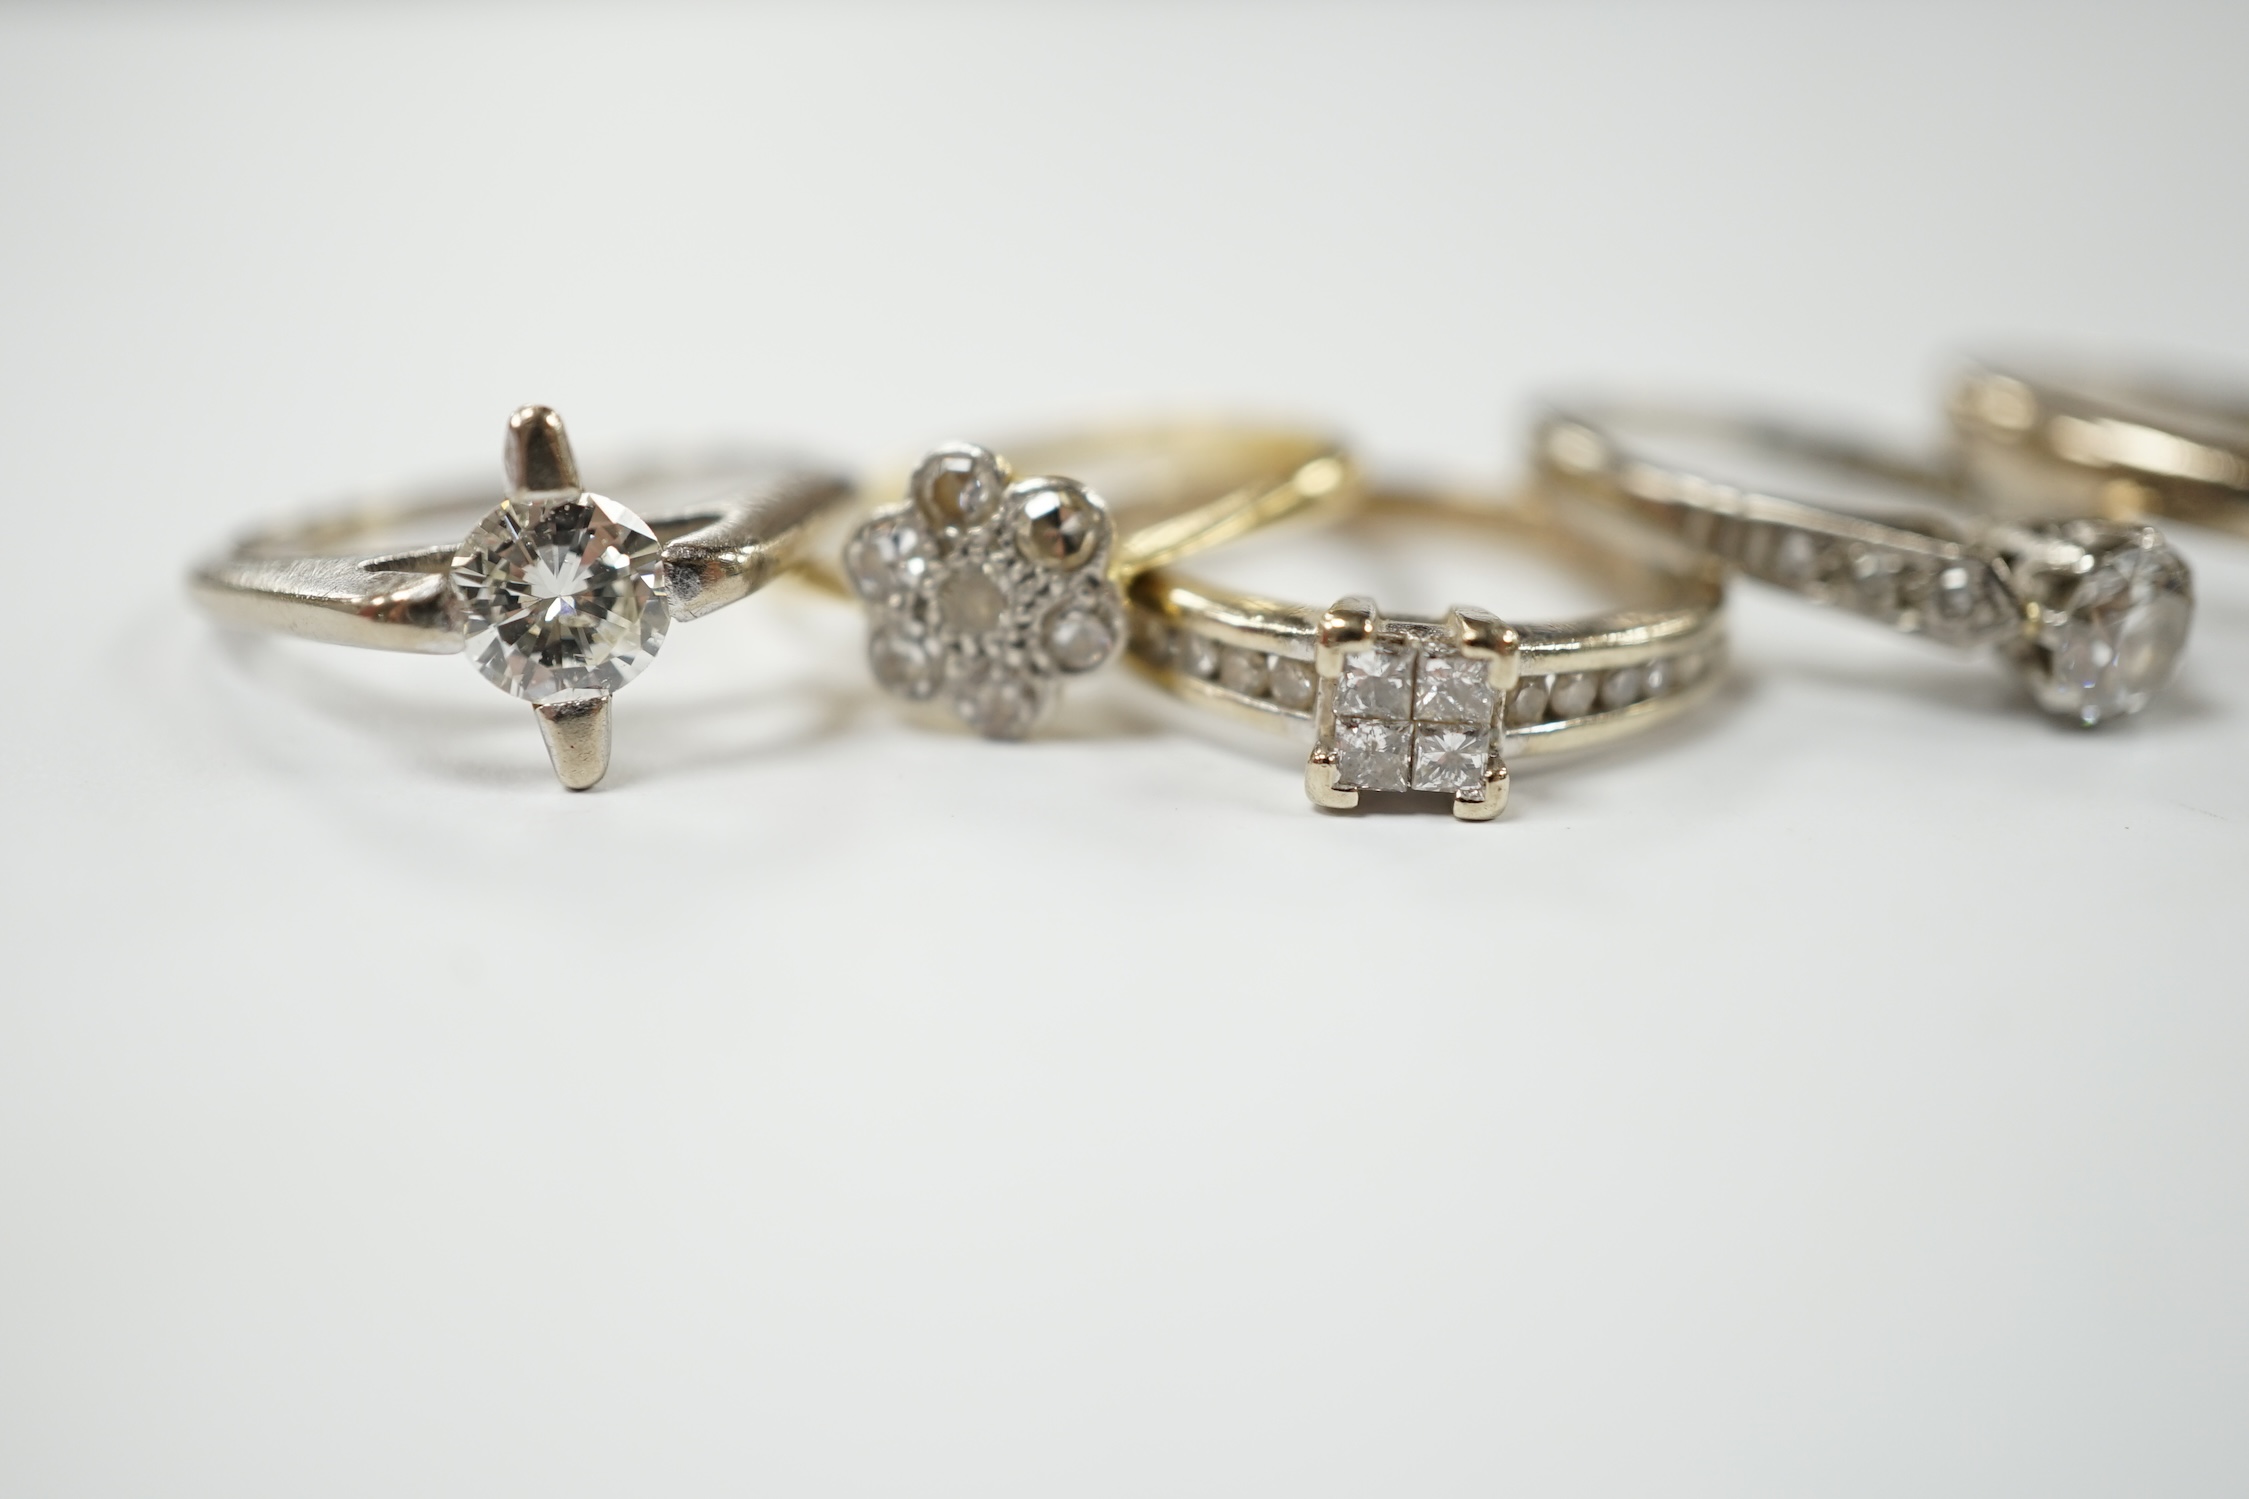 Four assorted 18ct, plat and diamond rings, including two solitaires and a flower head cluster, together with a modern 9ct and diamond cluster ring. Condition - fair